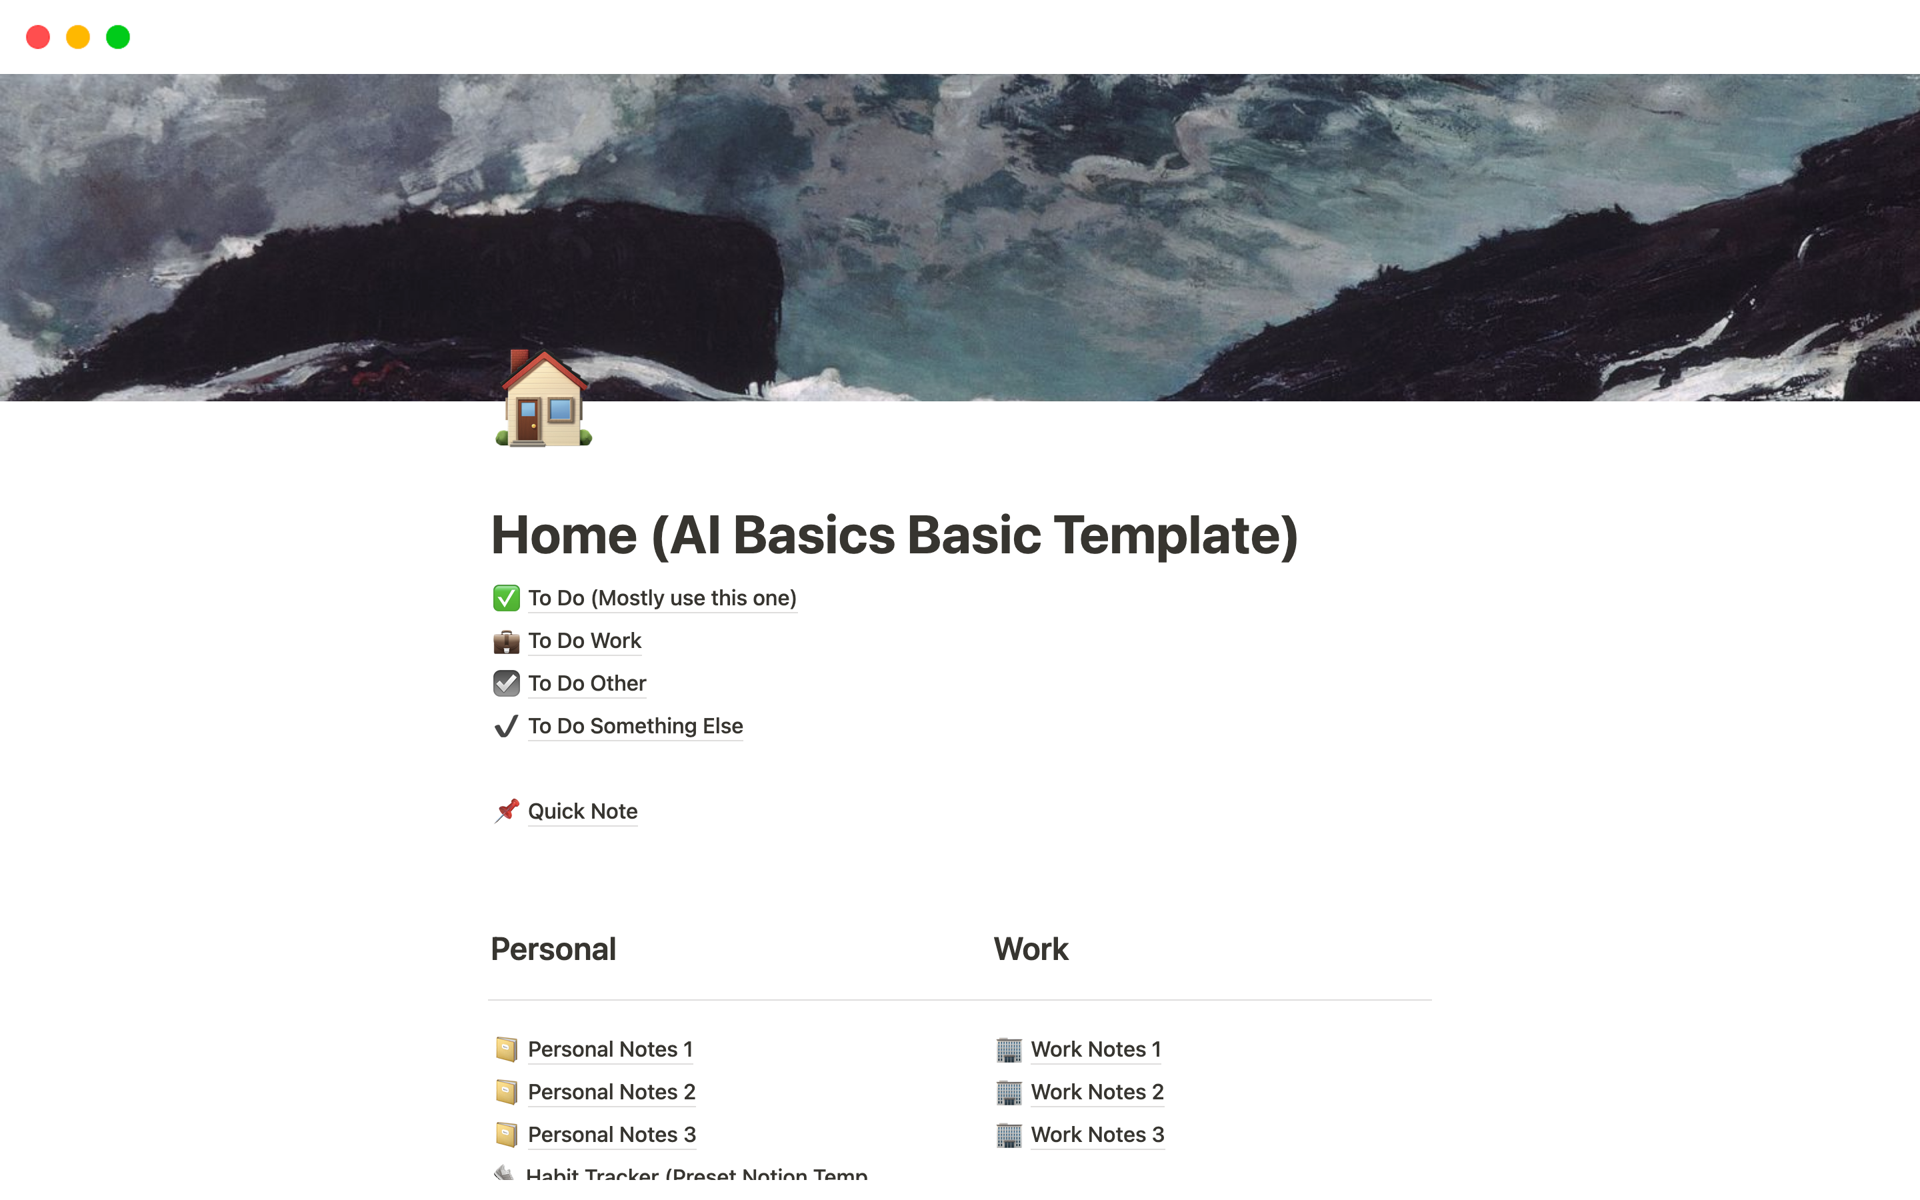 This is a homepage with templates to get you started with Notion, with a focus on organized To-Do lists.